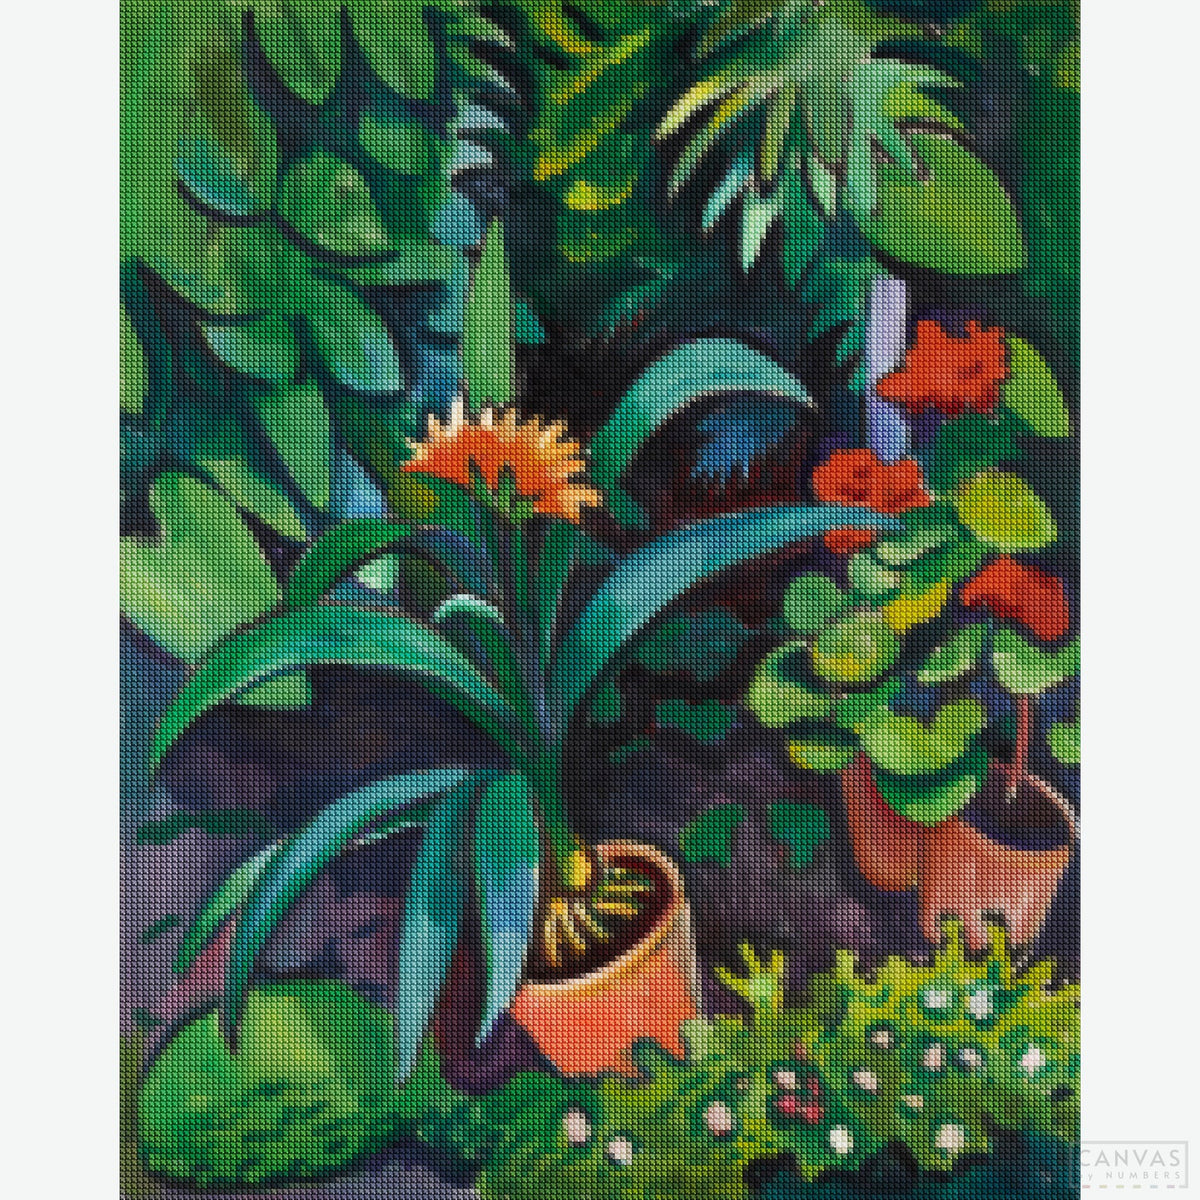 Flowers in the Garden, Clivia and Pelargonien - Diamond Painting-This August Macke paint by numbers presents a lovely floral scene full of greens. Ideal for beginners. Shop quality painting kits at Canvas by Numbers!-Canvas by Numbers